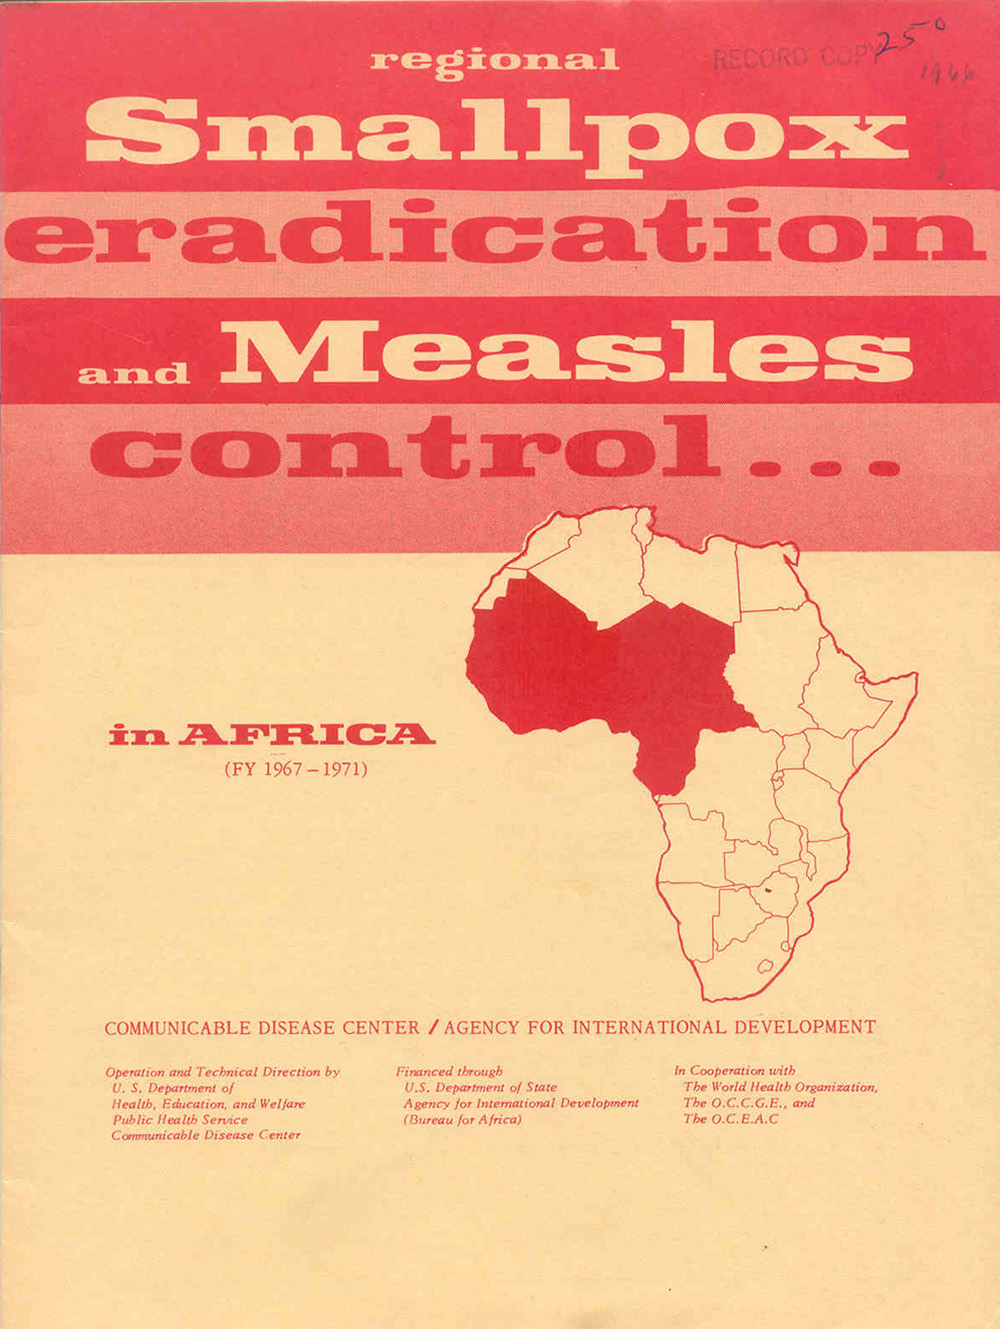 Smallpox and Measles in Africa